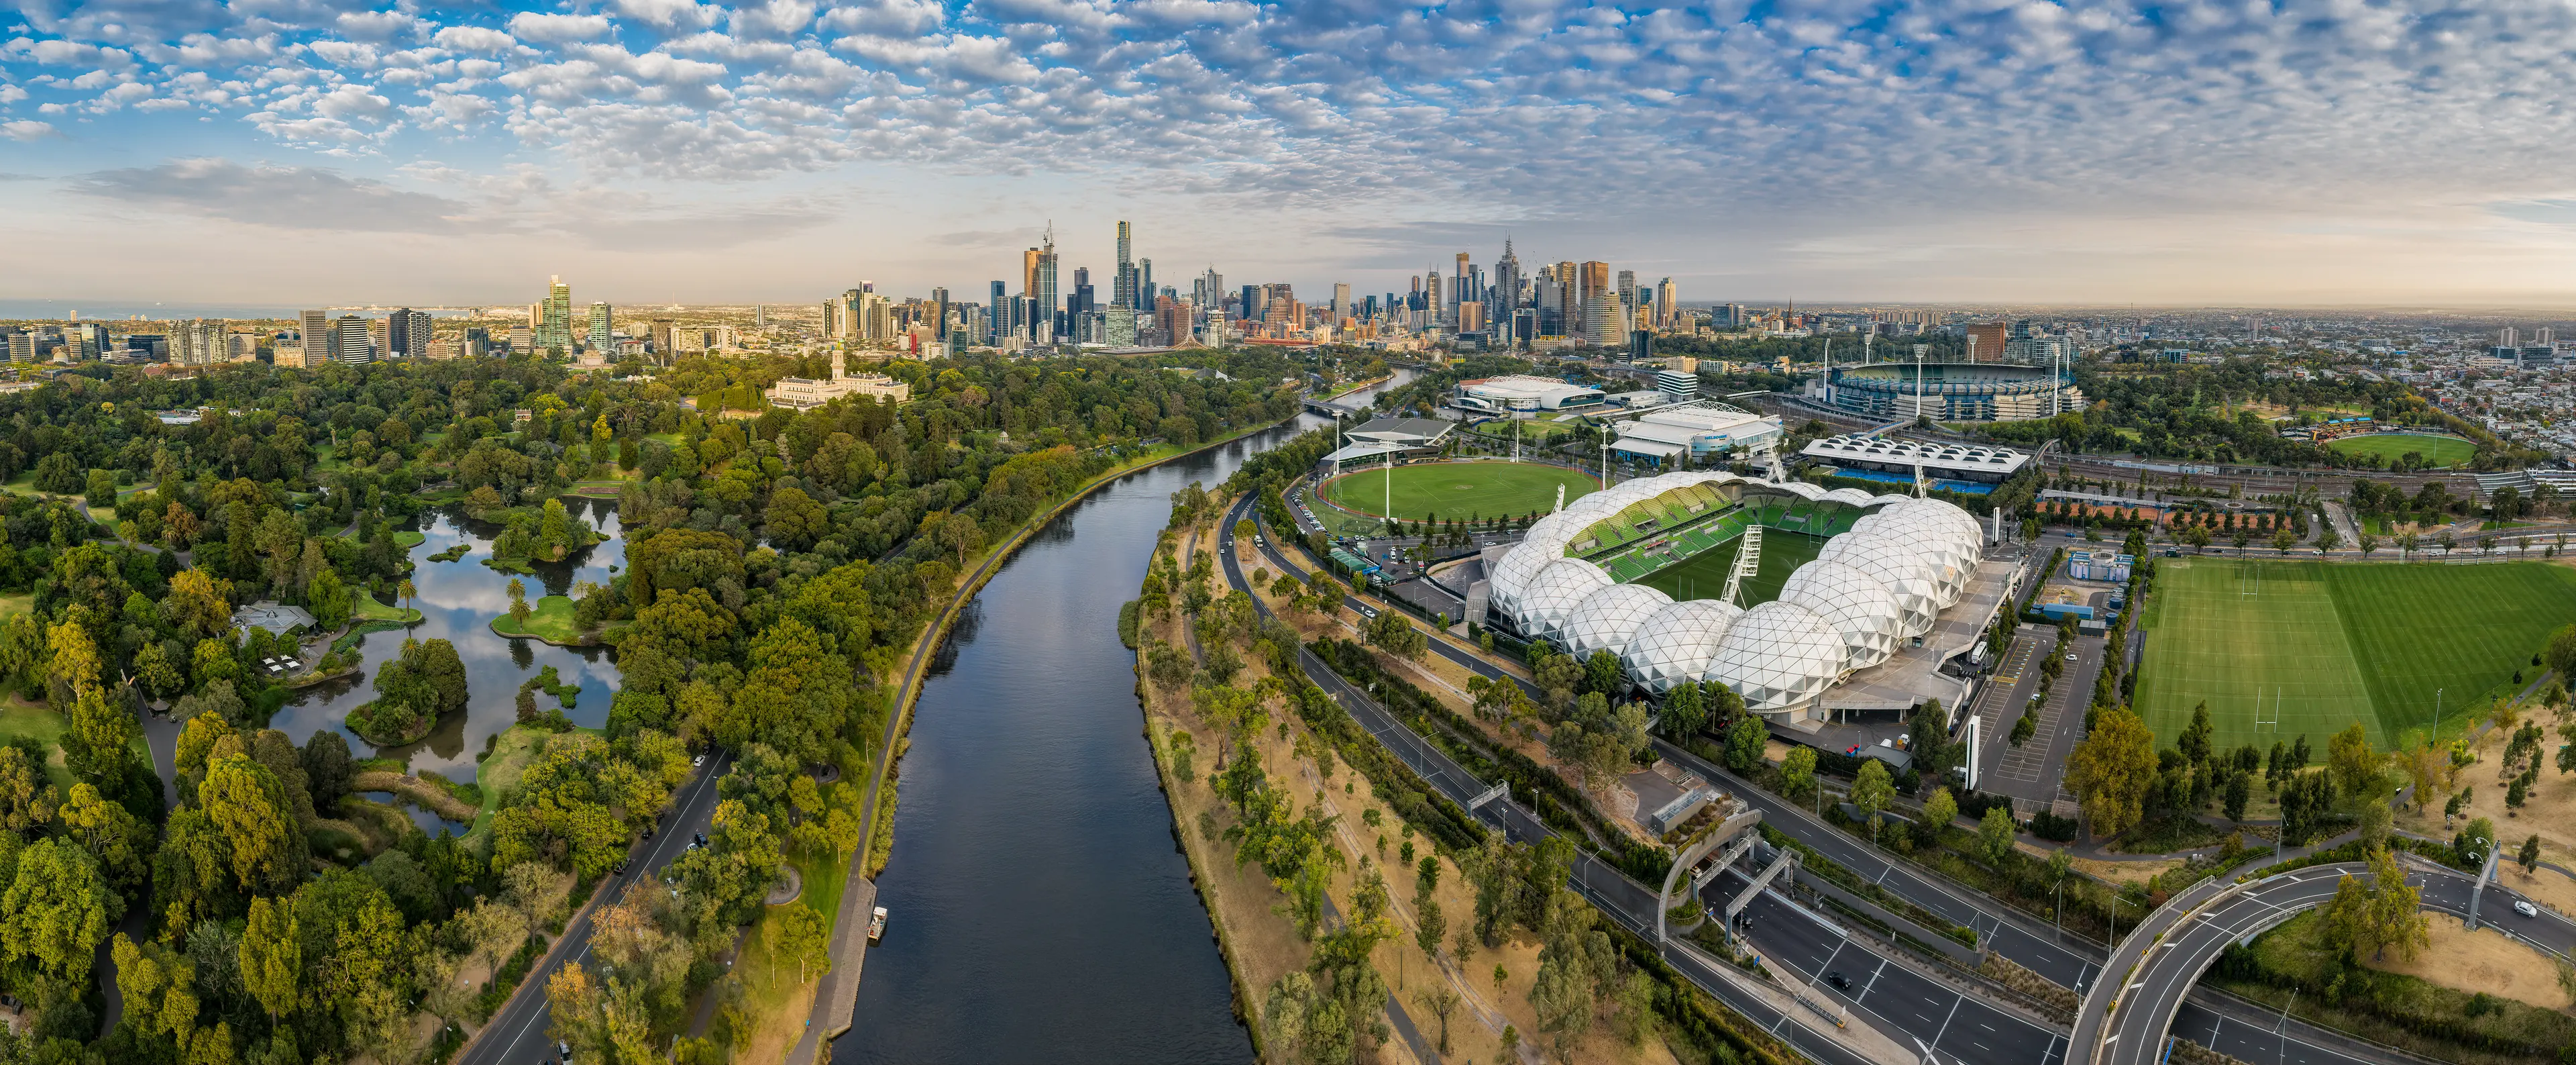 The MCG and AAMI stadium, with the CBD in the background